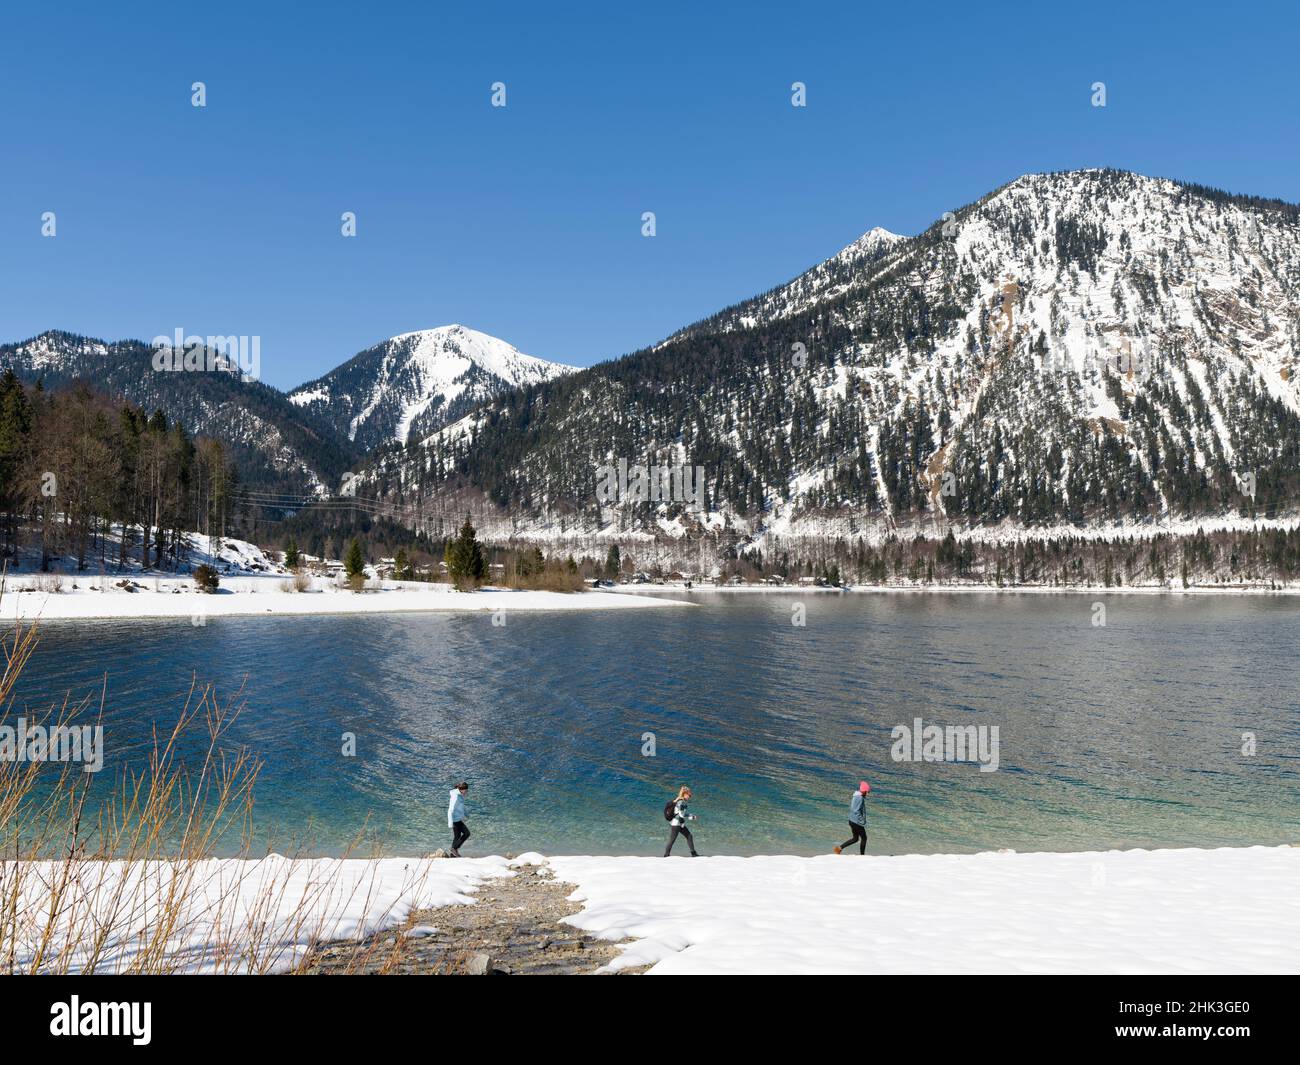 View towards village Walchensee, Mt. Herzogstand and Mt. Heimgarten. Lake Walchensee in the snowy Bavarian Alps. Germany, Bavaria. (Editorial Use Only Stock Photo